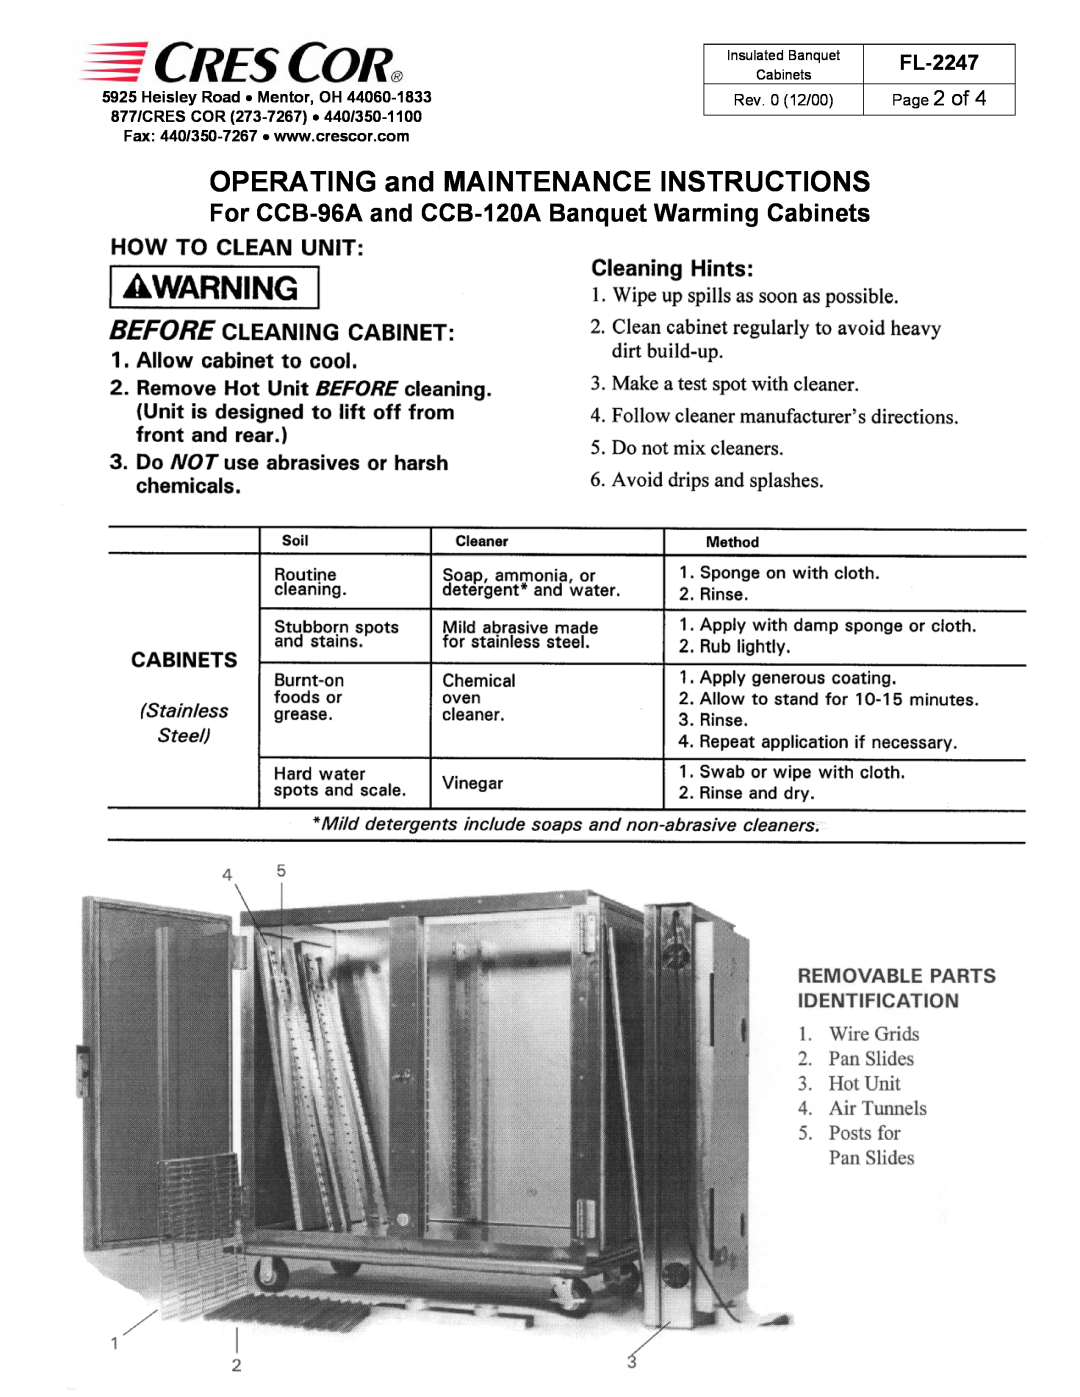 Cres Cor OPERATING and MAINTENANCE INSTRUCTIONS, Page 2 of, For CCB-96Aand CCB-120ABanquet Warming Cabinets, FL-2247 